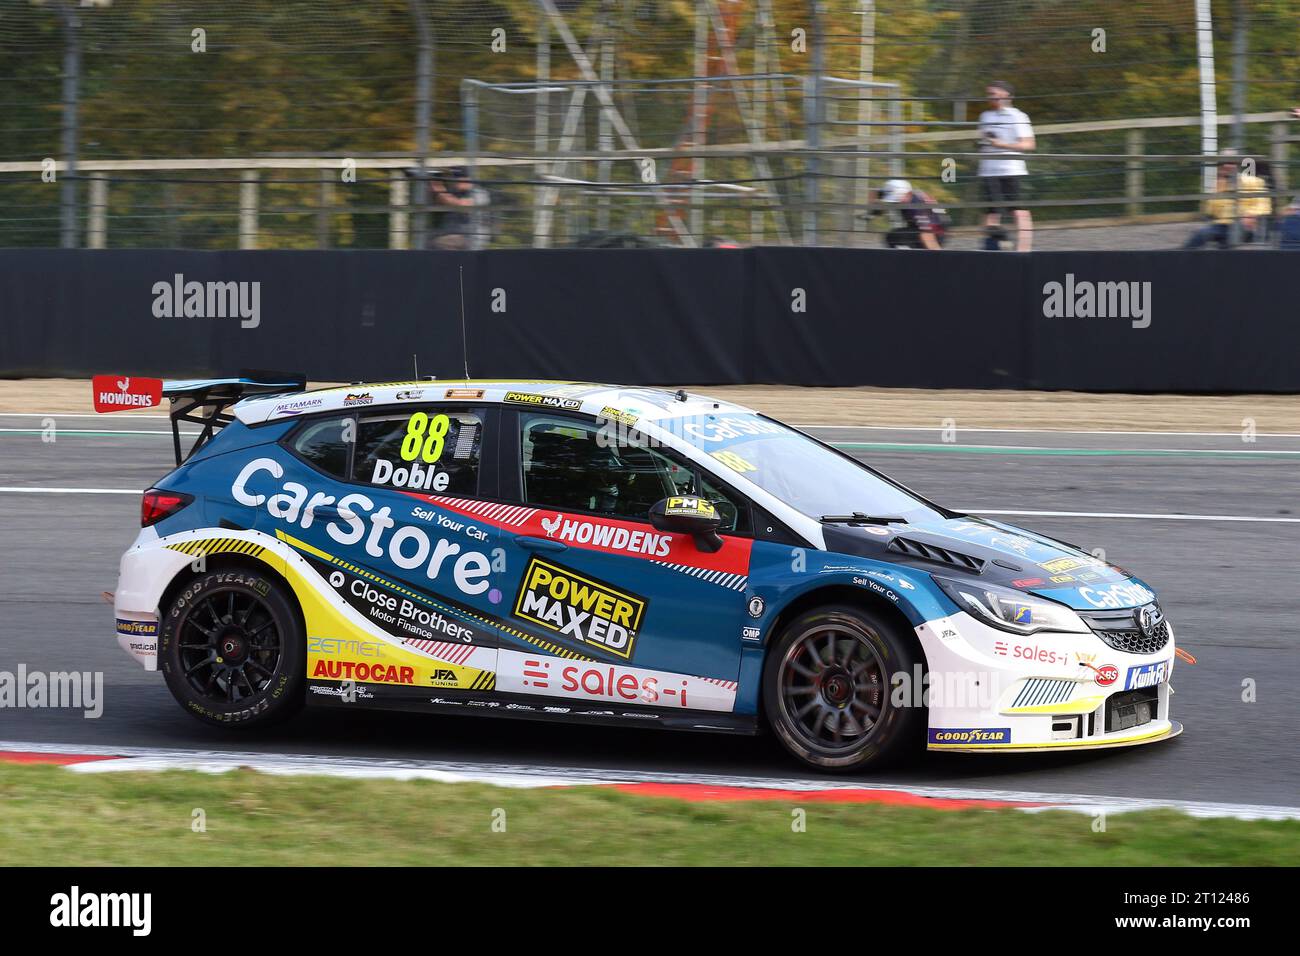 Mikey Doble - Carstore Power Maxed Racing -  driving Vauxhall Astra number 88 in the 2023 BTCC at Brands Hatch in October 2023 Stock Photo